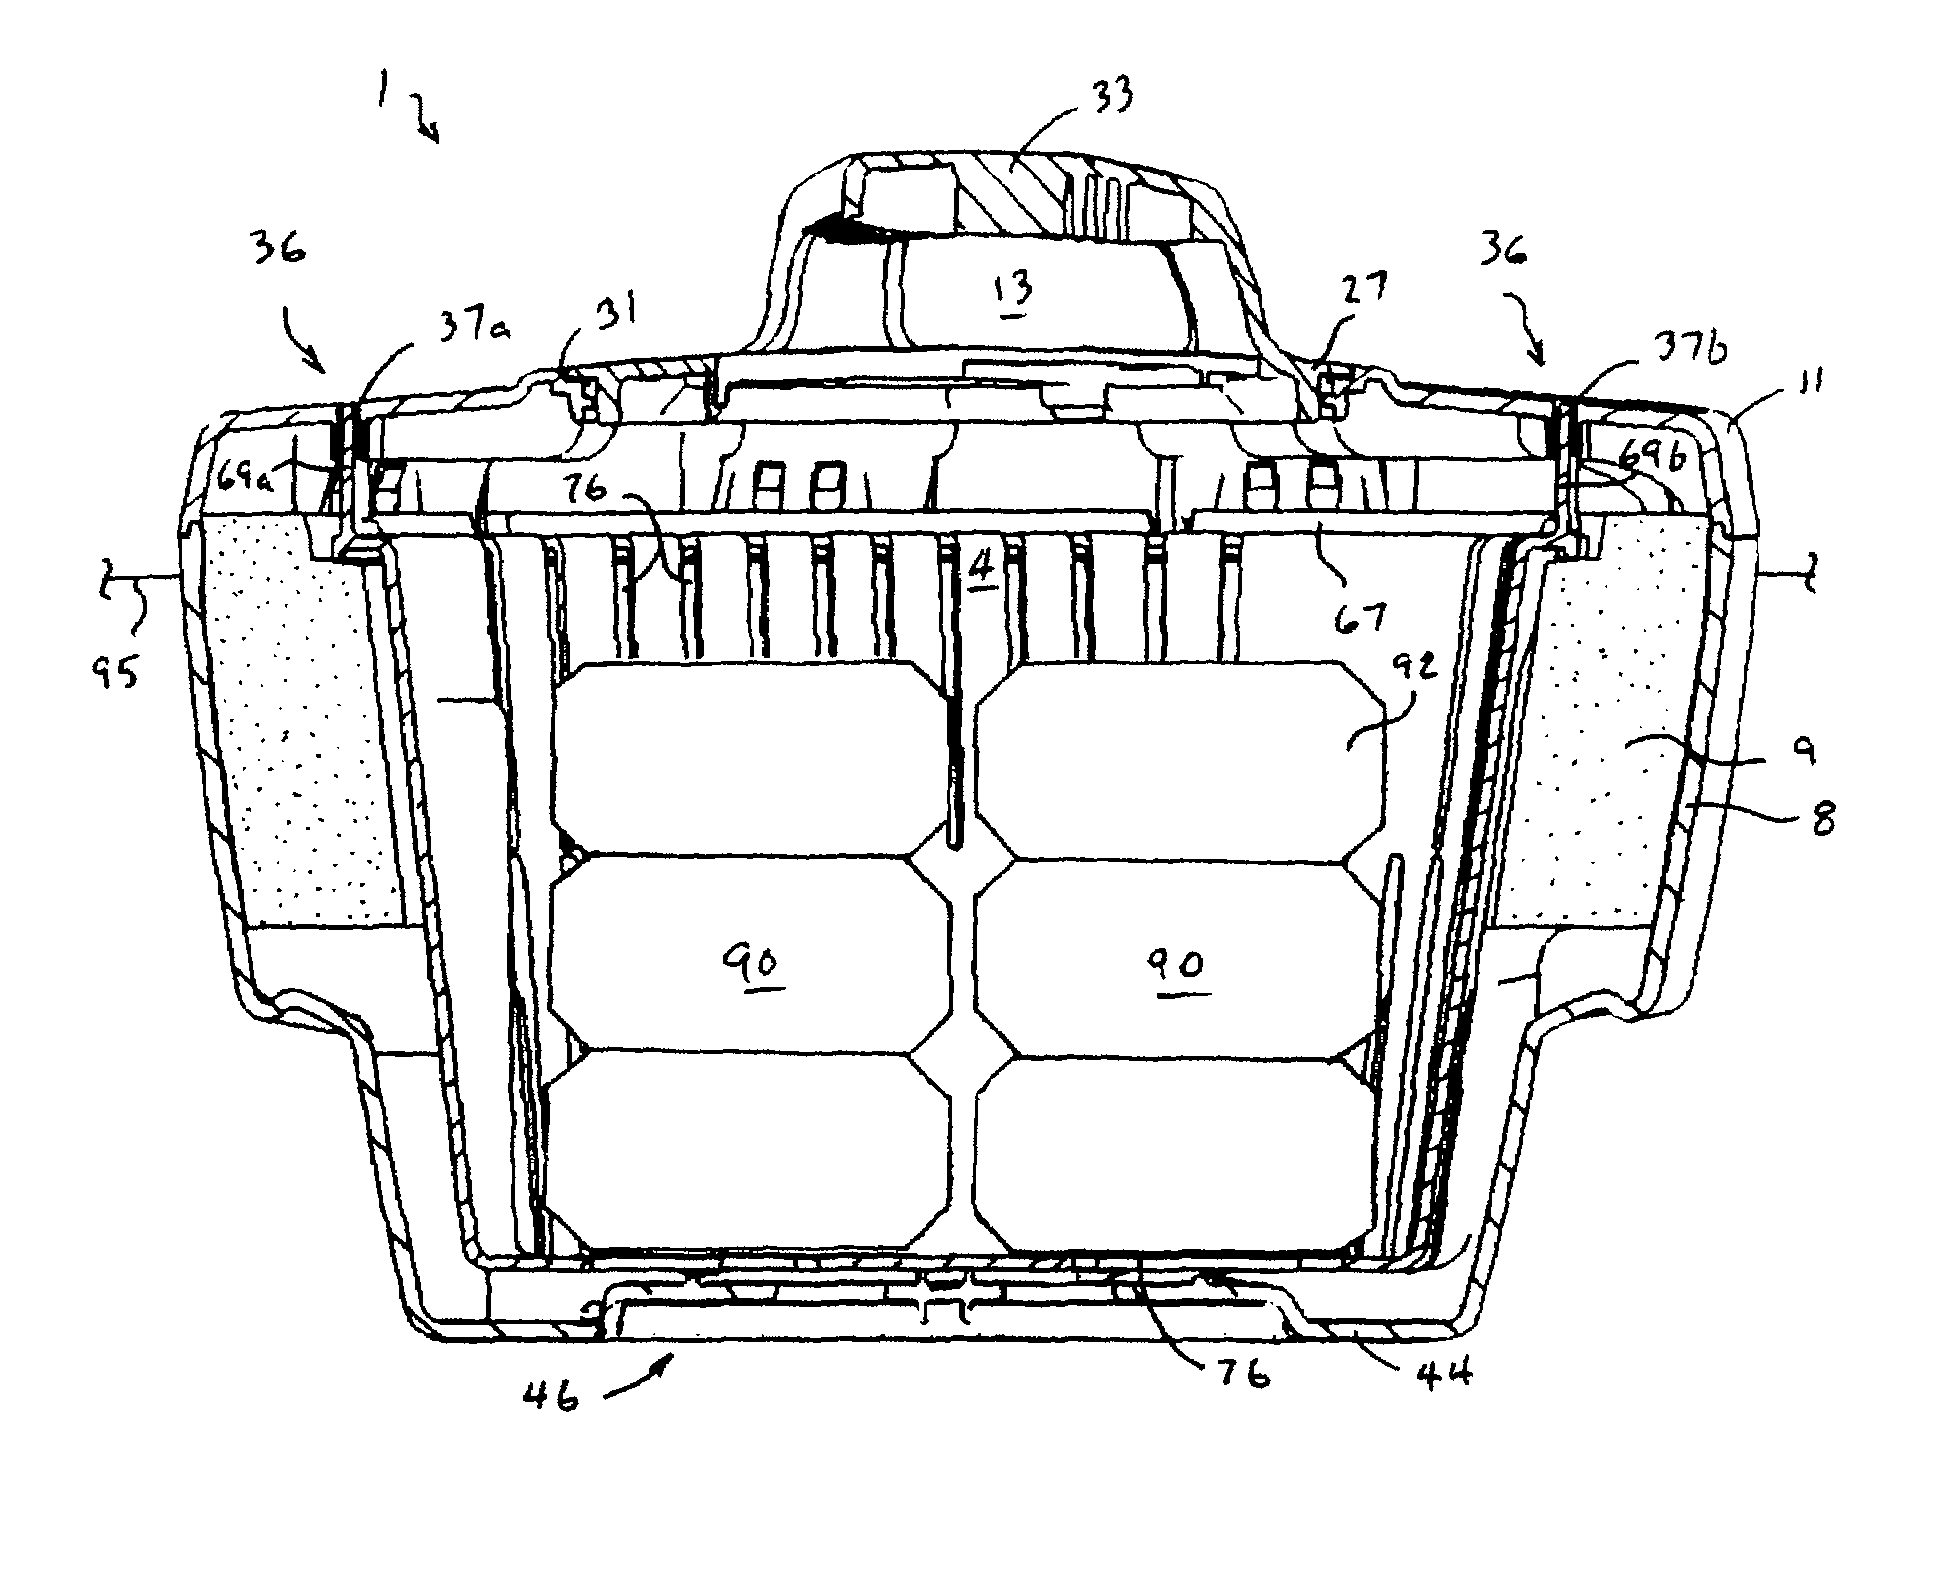 Floating dispenser for dispensing a solid dissolvable chemical into ambient water